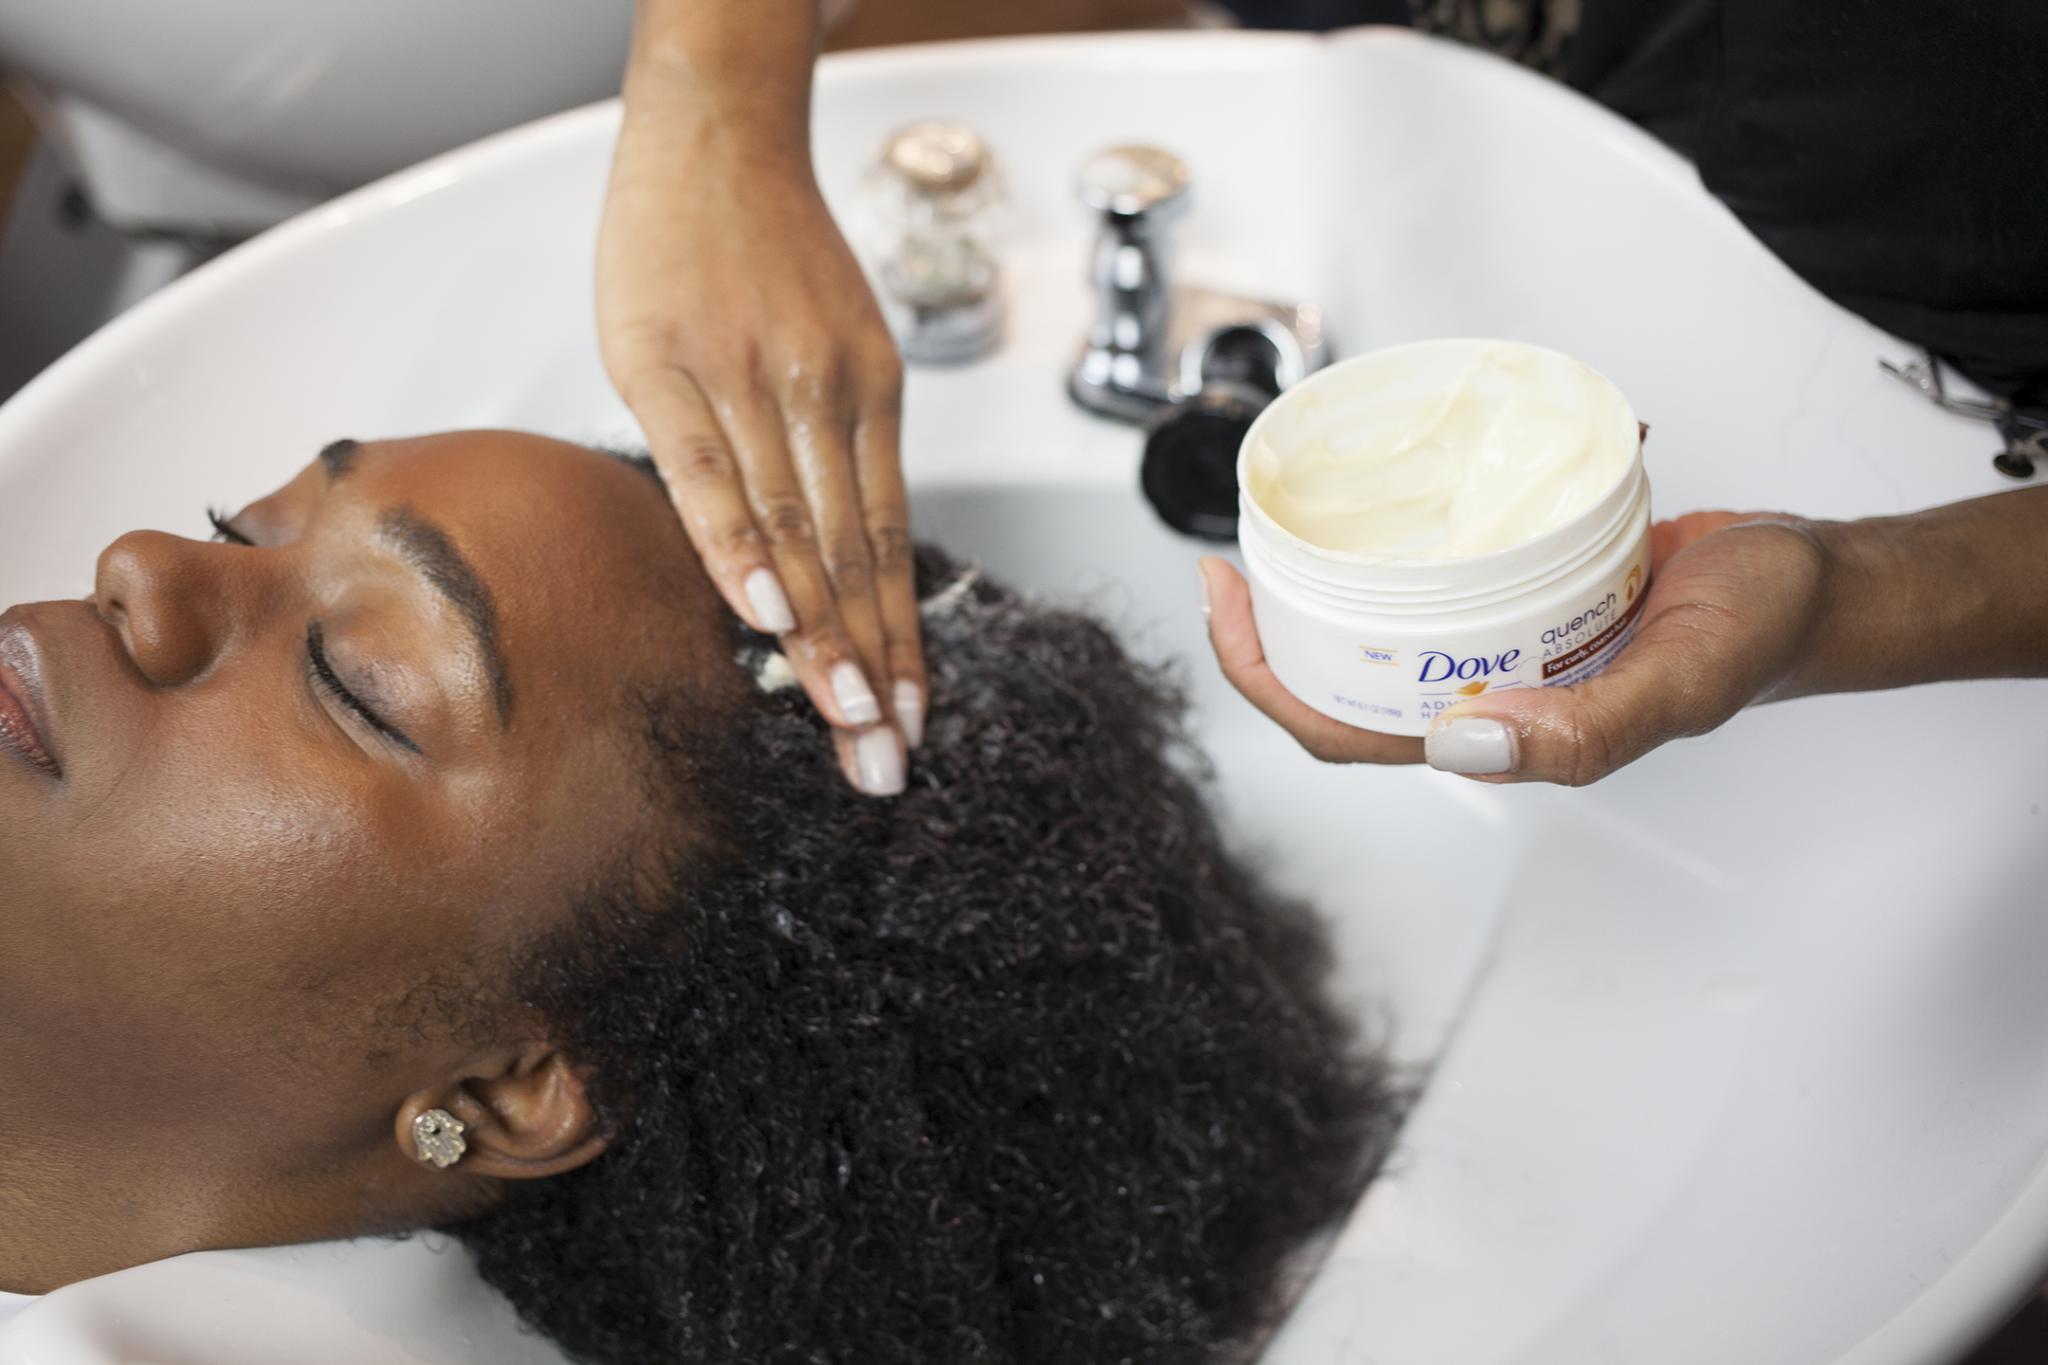 7 Easy Hair Rules For Every Curl Pattern
